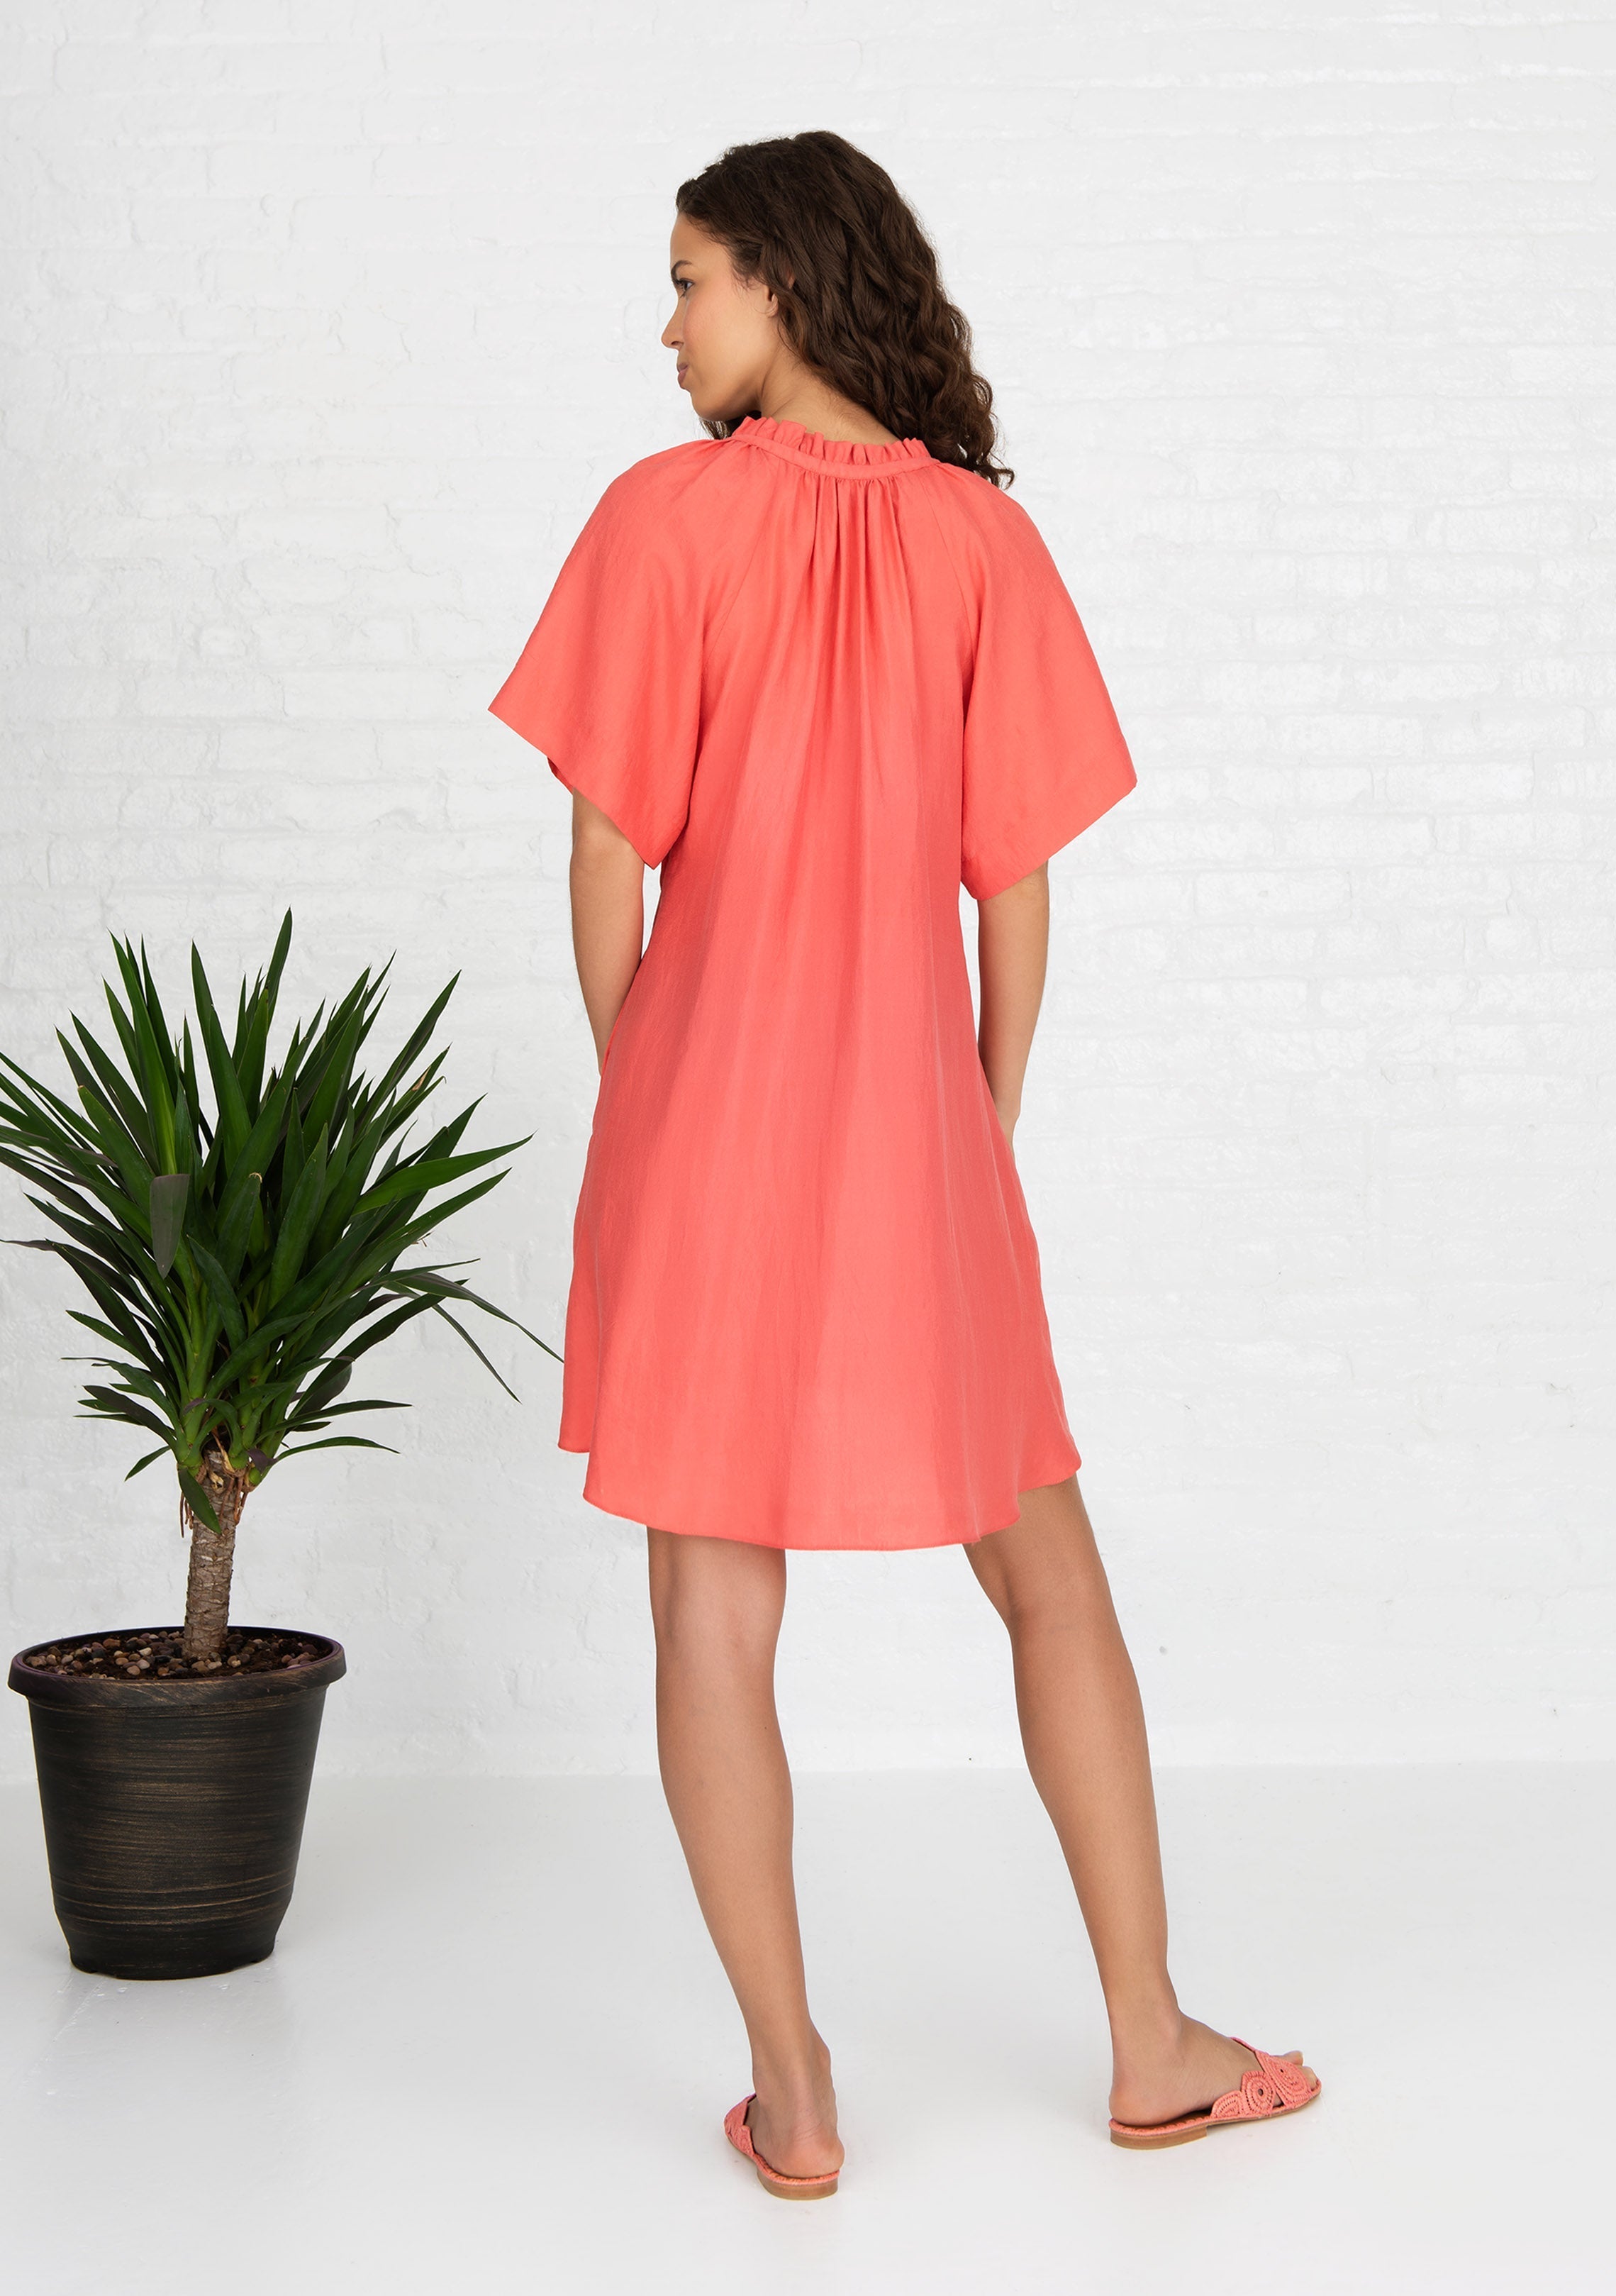 back profile view of woman wearing coral short sleeved silk dress handwoven